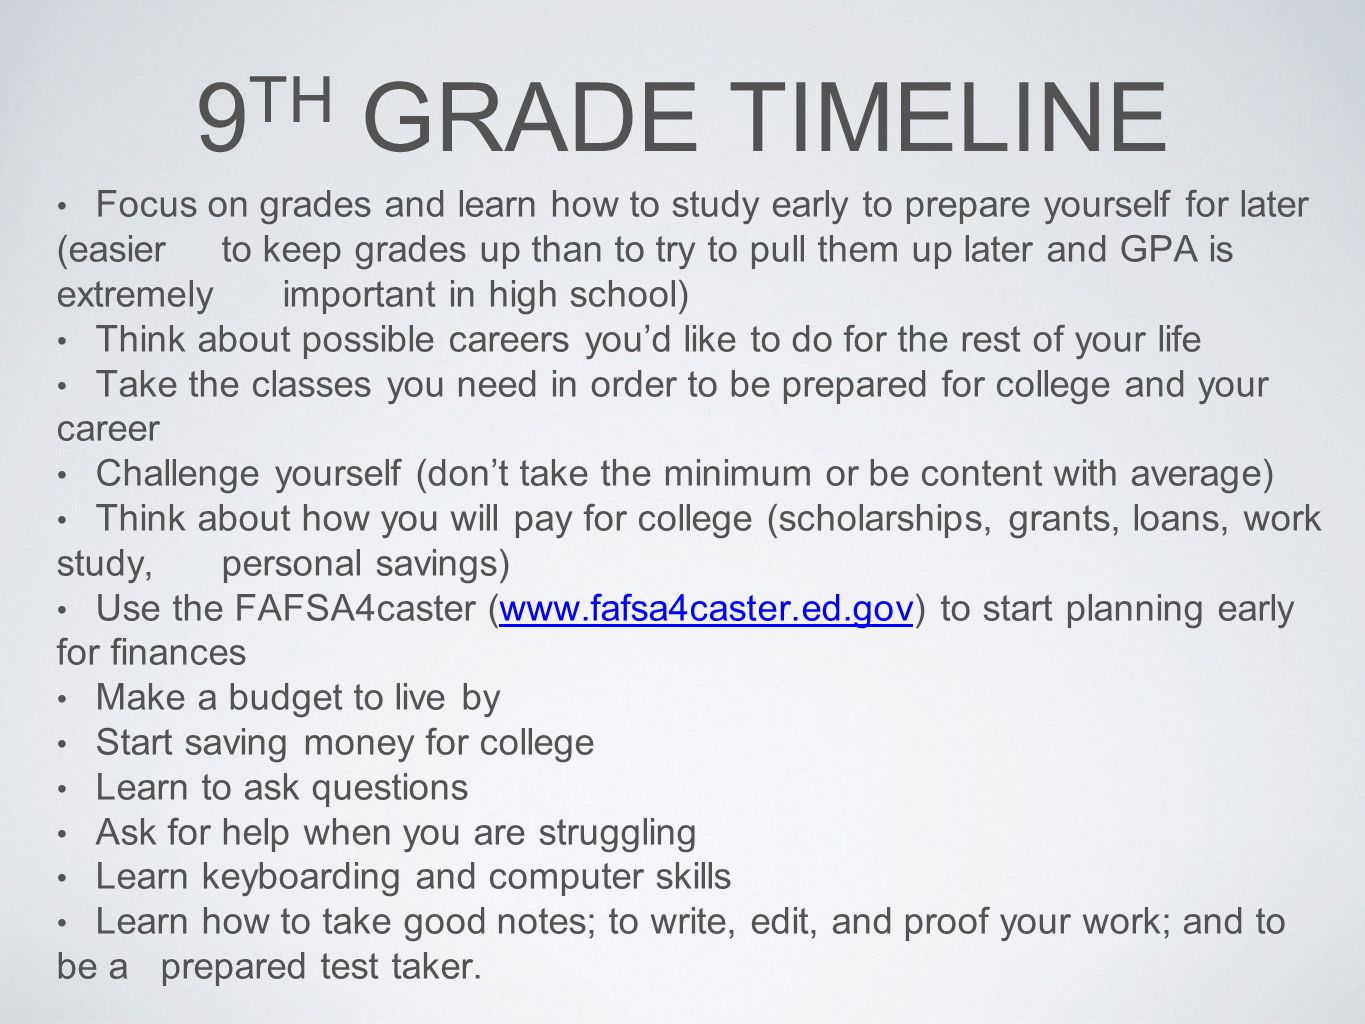 9 TH GRADE TIMELINE Focus on grades and learn how to study early to prepare yourself for later (easier to keep grades up than to try to pull them up later and GPA is extremely important in high school) Think about possible careers you’d like to do for the rest of your life Take the classes you need in order to be prepared for college and your career Challenge yourself (don’t take the minimum or be content with average) Think about how you will pay for college (scholarships, grants, loans, work study, personal savings) Use the FAFSA4caster (  to start planning early for financeswww.fafsa4caster.ed.gov Make a budget to live by Start saving money for college Learn to ask questions Ask for help when you are struggling Learn keyboarding and computer skills Learn how to take good notes; to write, edit, and proof your work; and to be a prepared test taker.